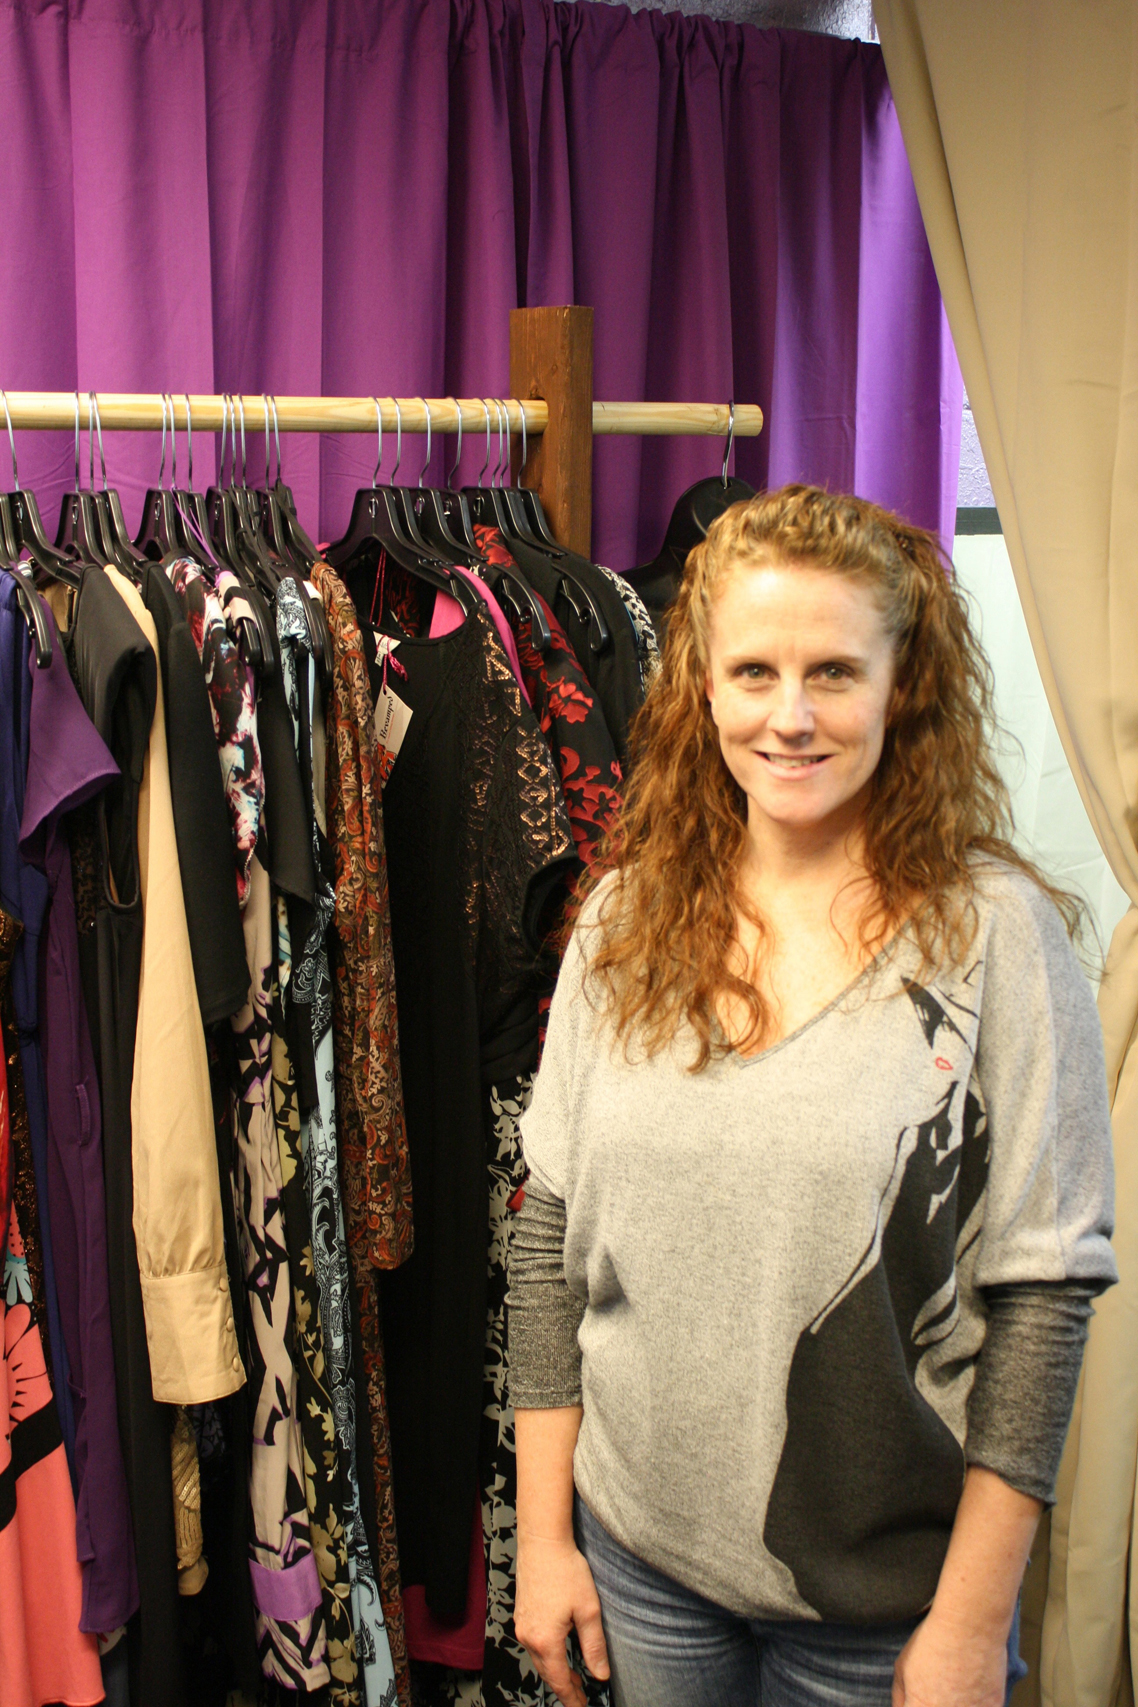 Revamped’s owner Michelle Jones pauses for a picture in front of a rack of clothes in her store at 126 W. Pioneer Ave., Suite 2.-Photo by Lindsay Olsen